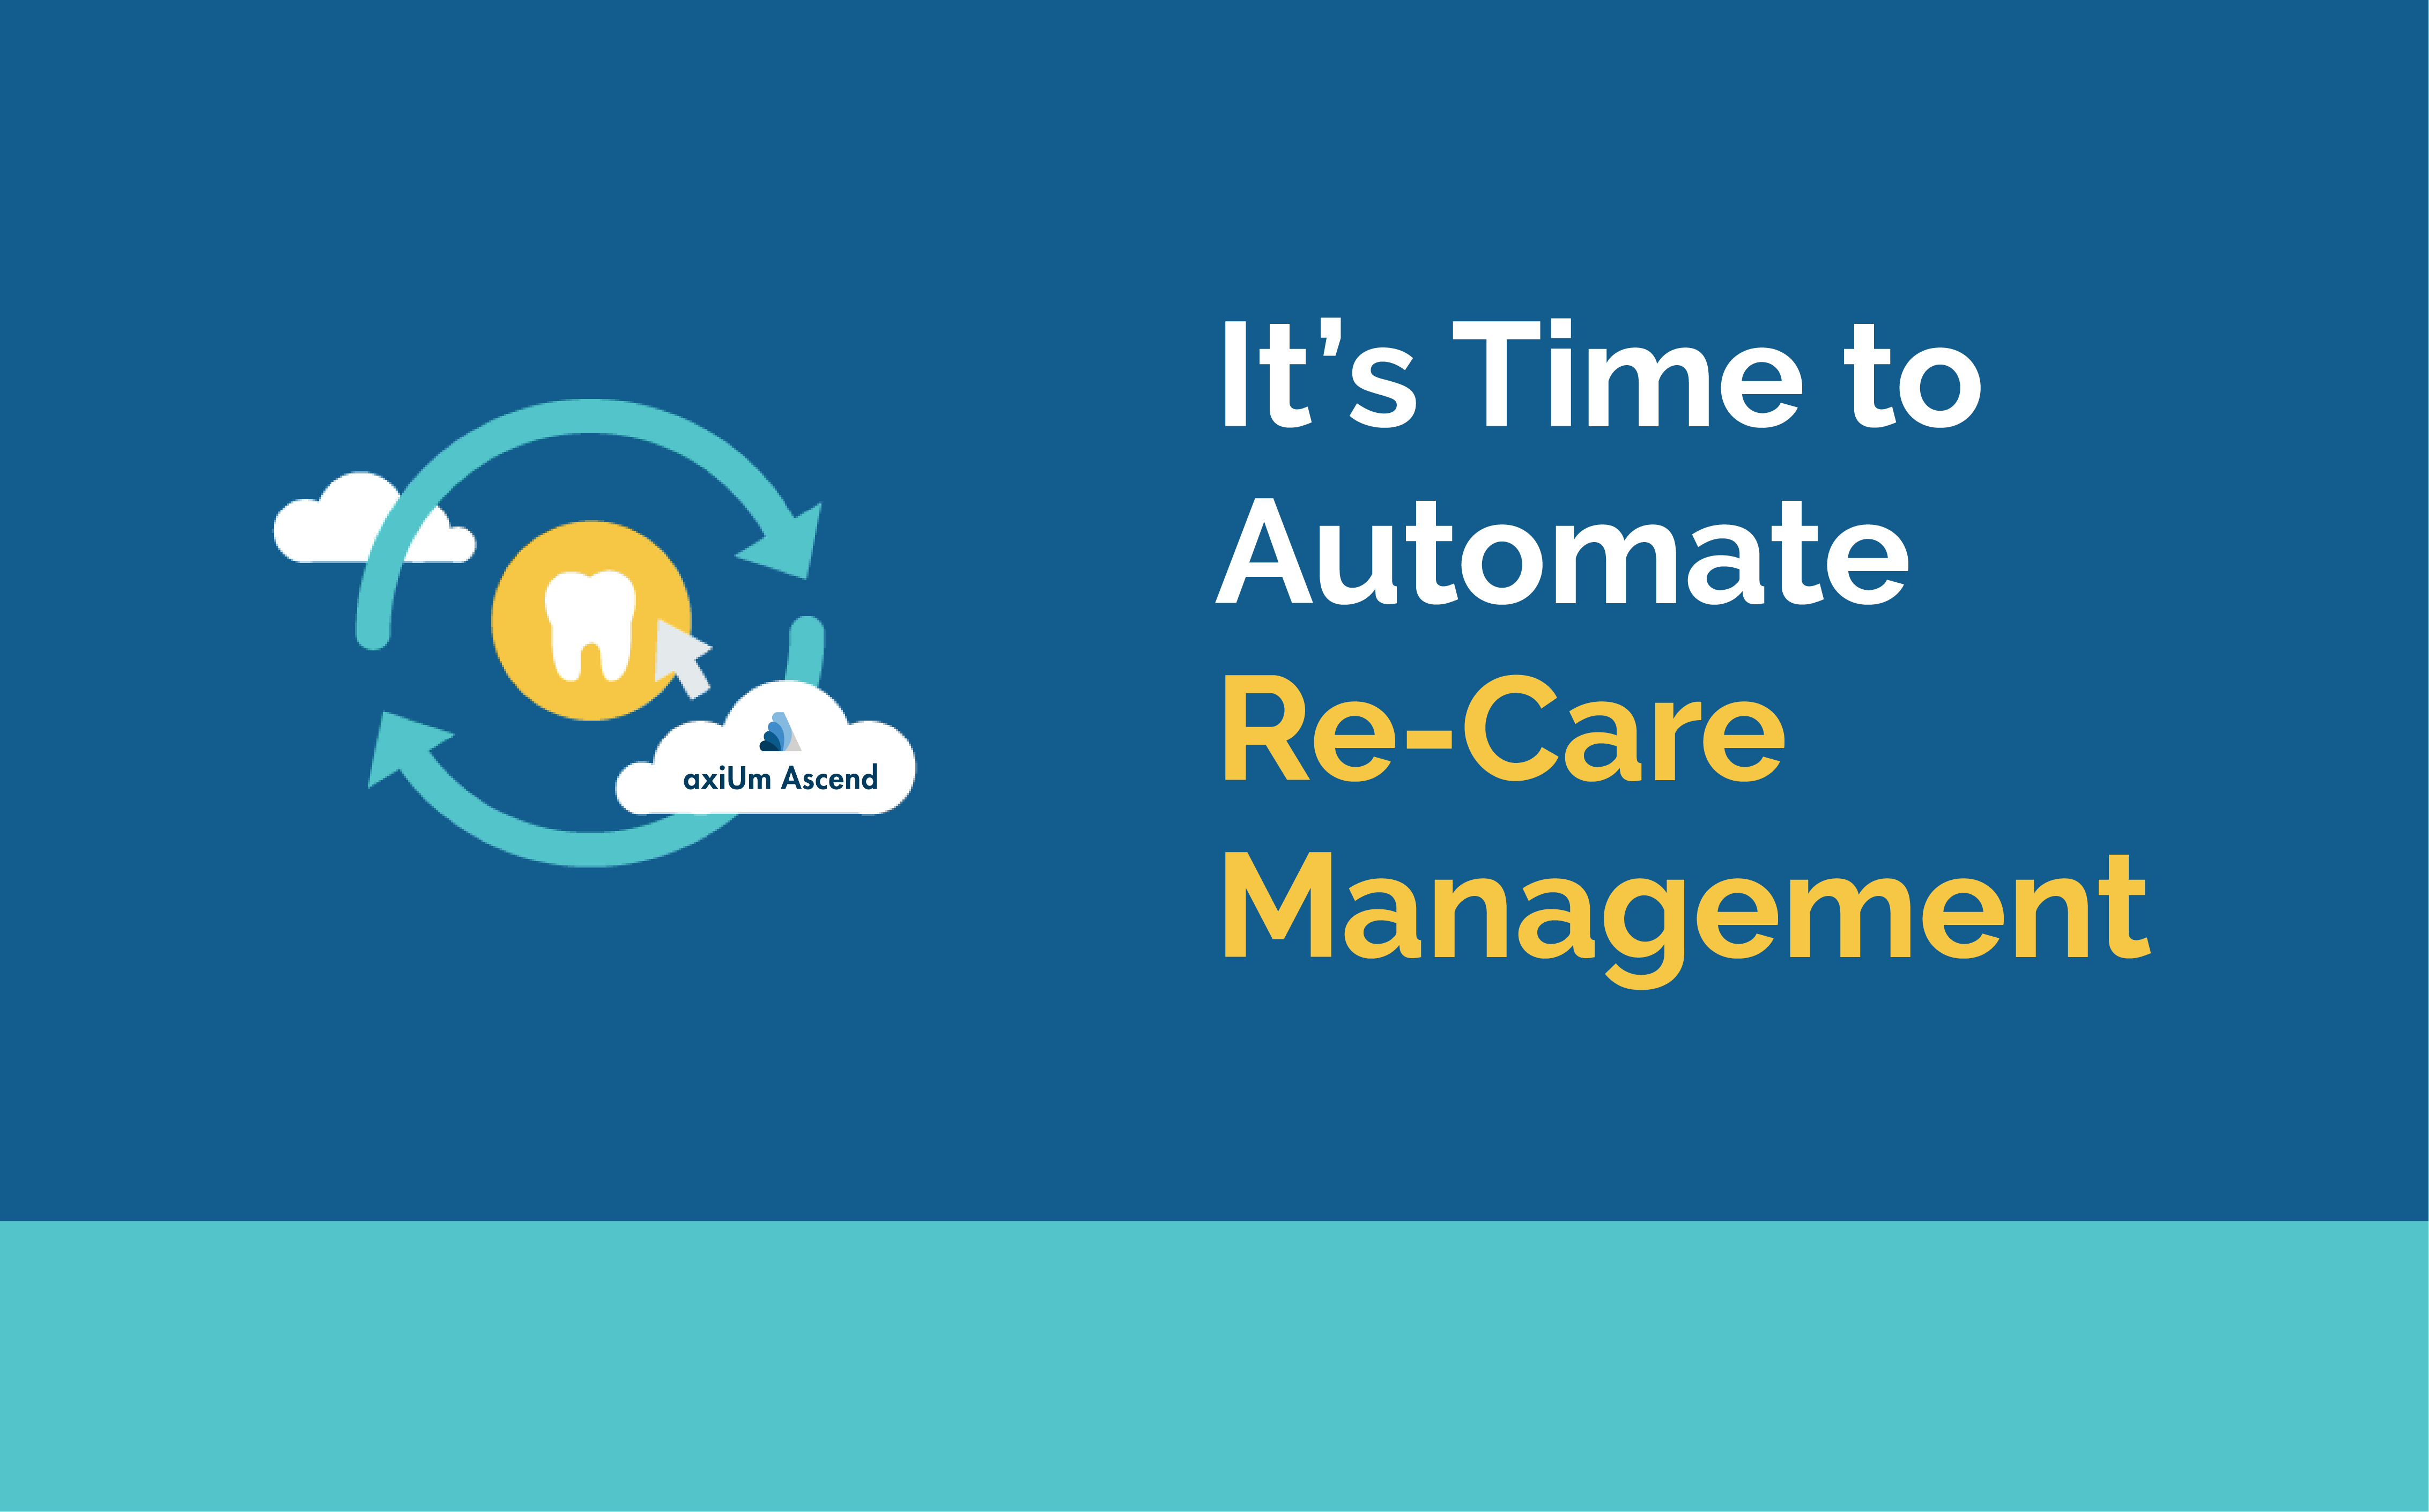 It’s Time to Automate Re-care Management